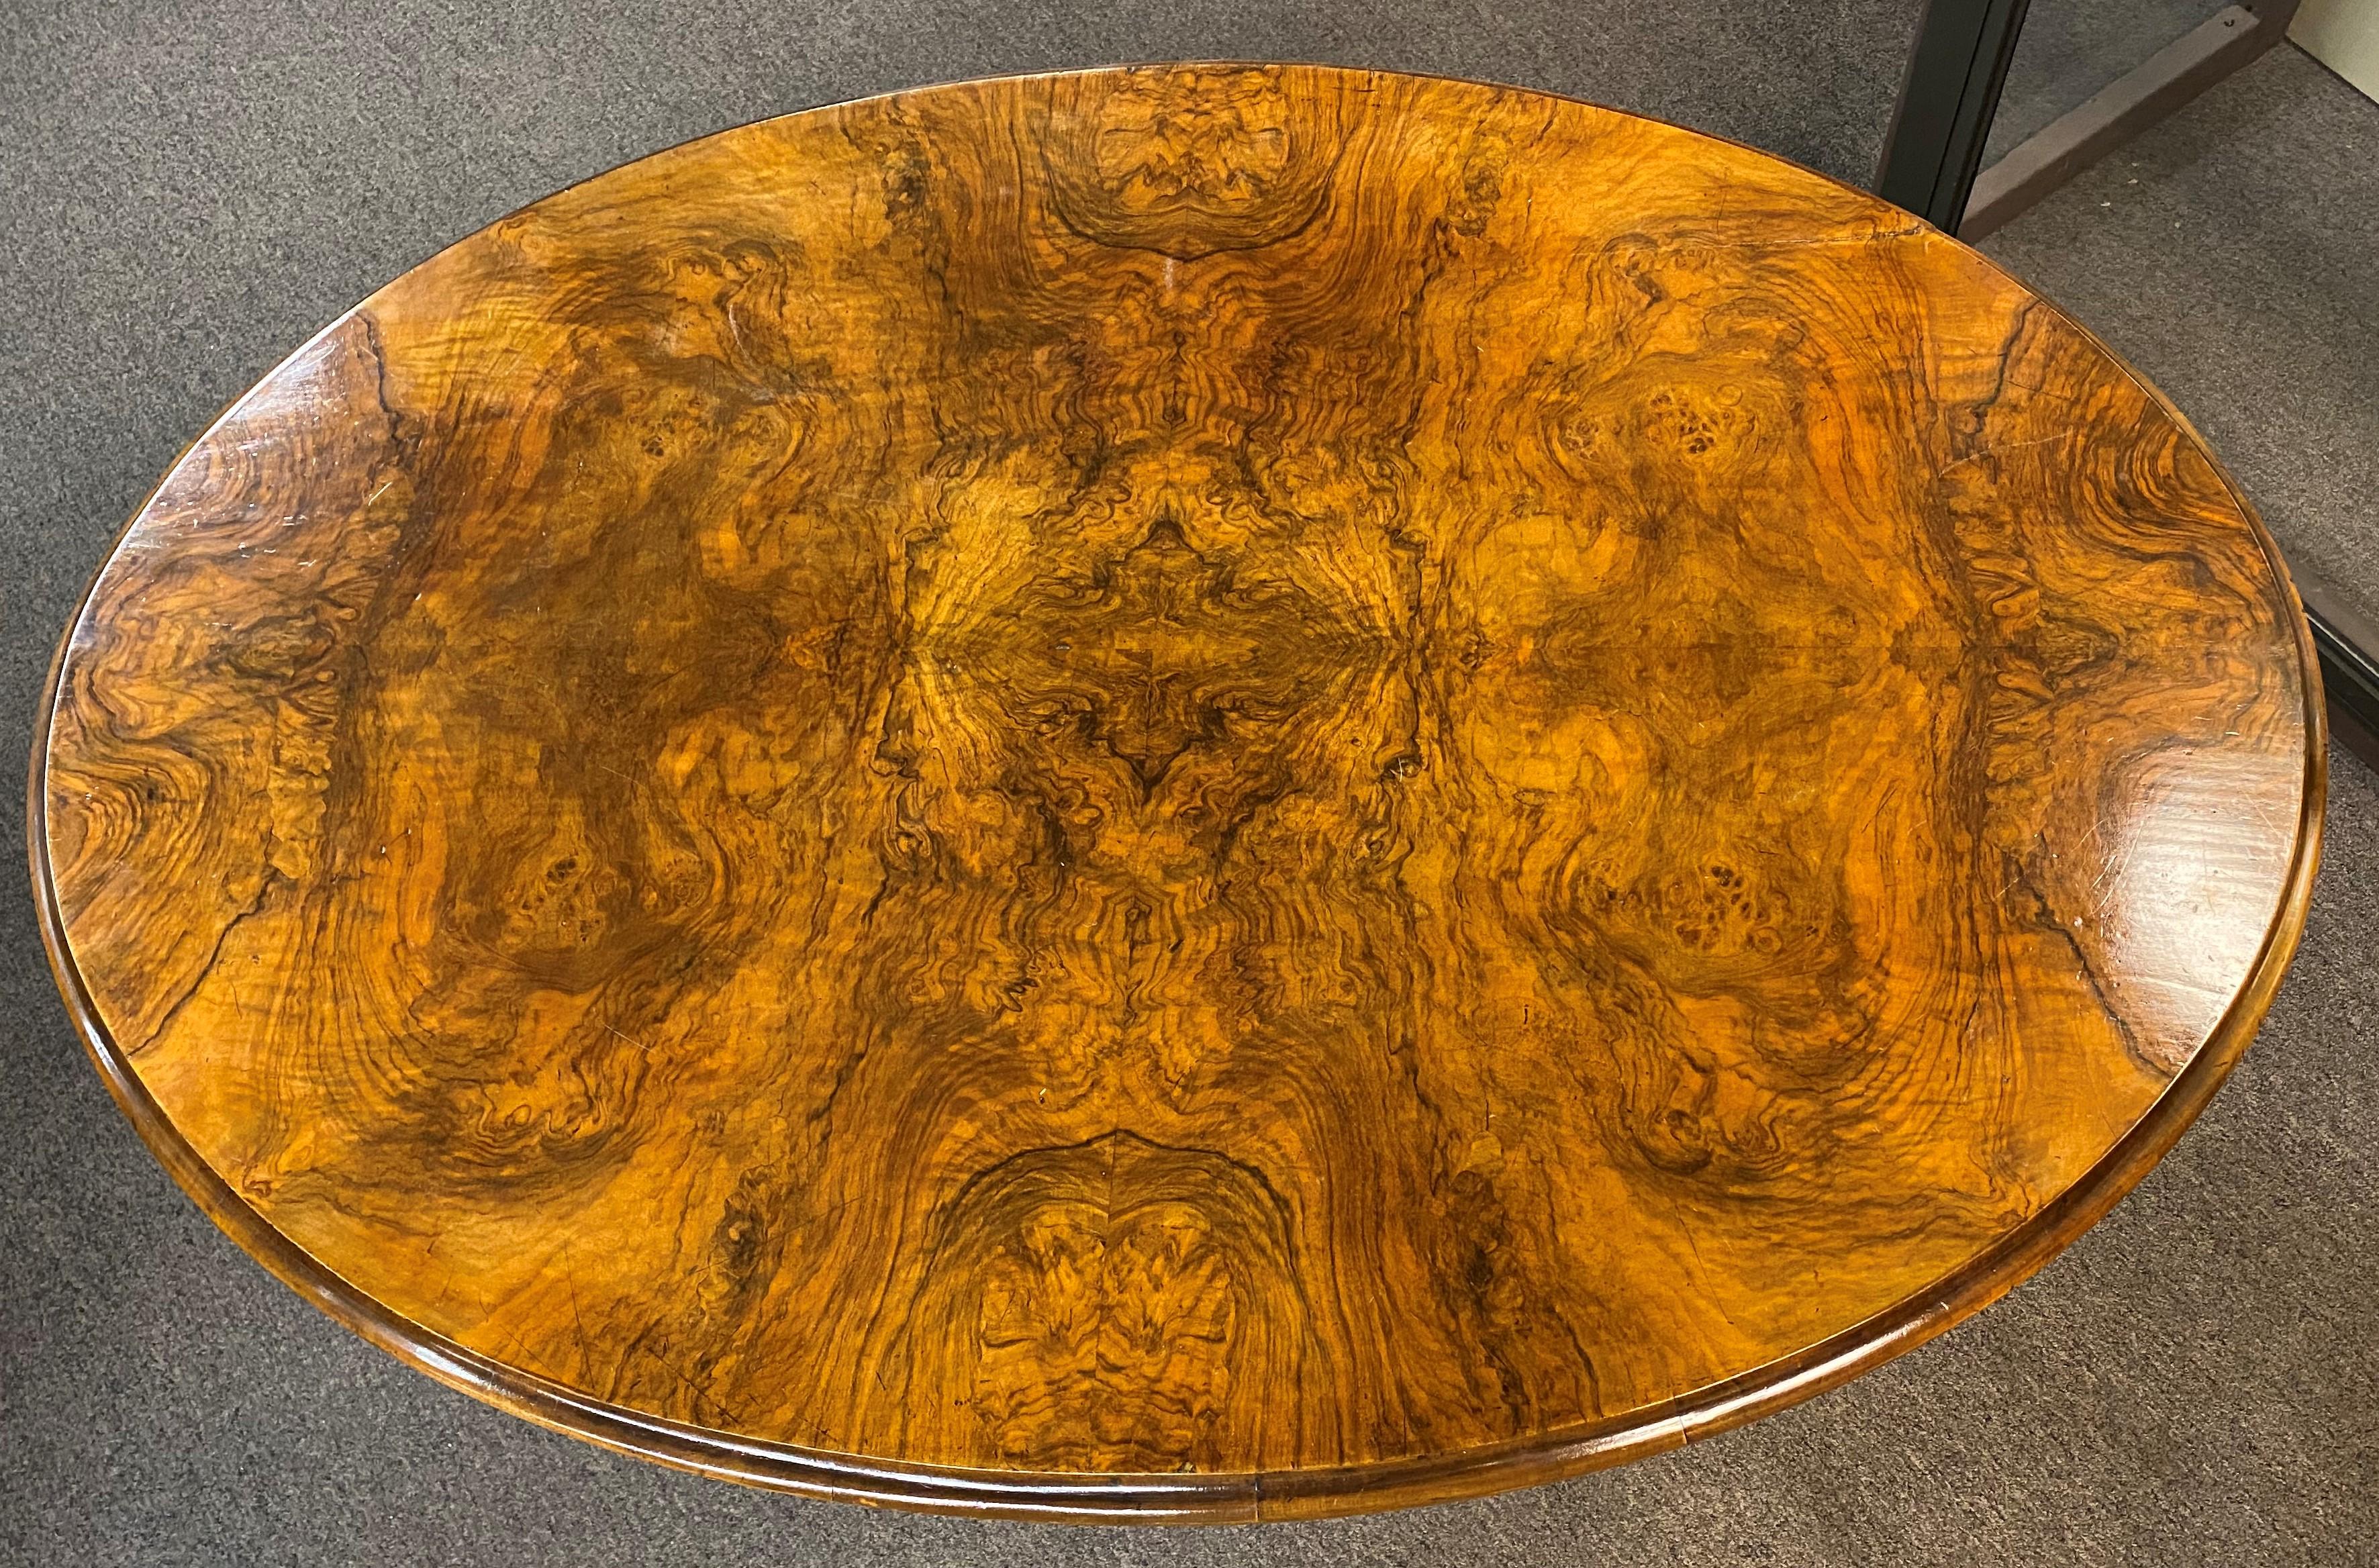 A fine example of a burled walnut veneer oval tilt top breakfast table or center table with a nicely carved four leg pedestal terminating with brass casters. An oval William Wallace & Company, London tag appears on the pedestal, a well known English